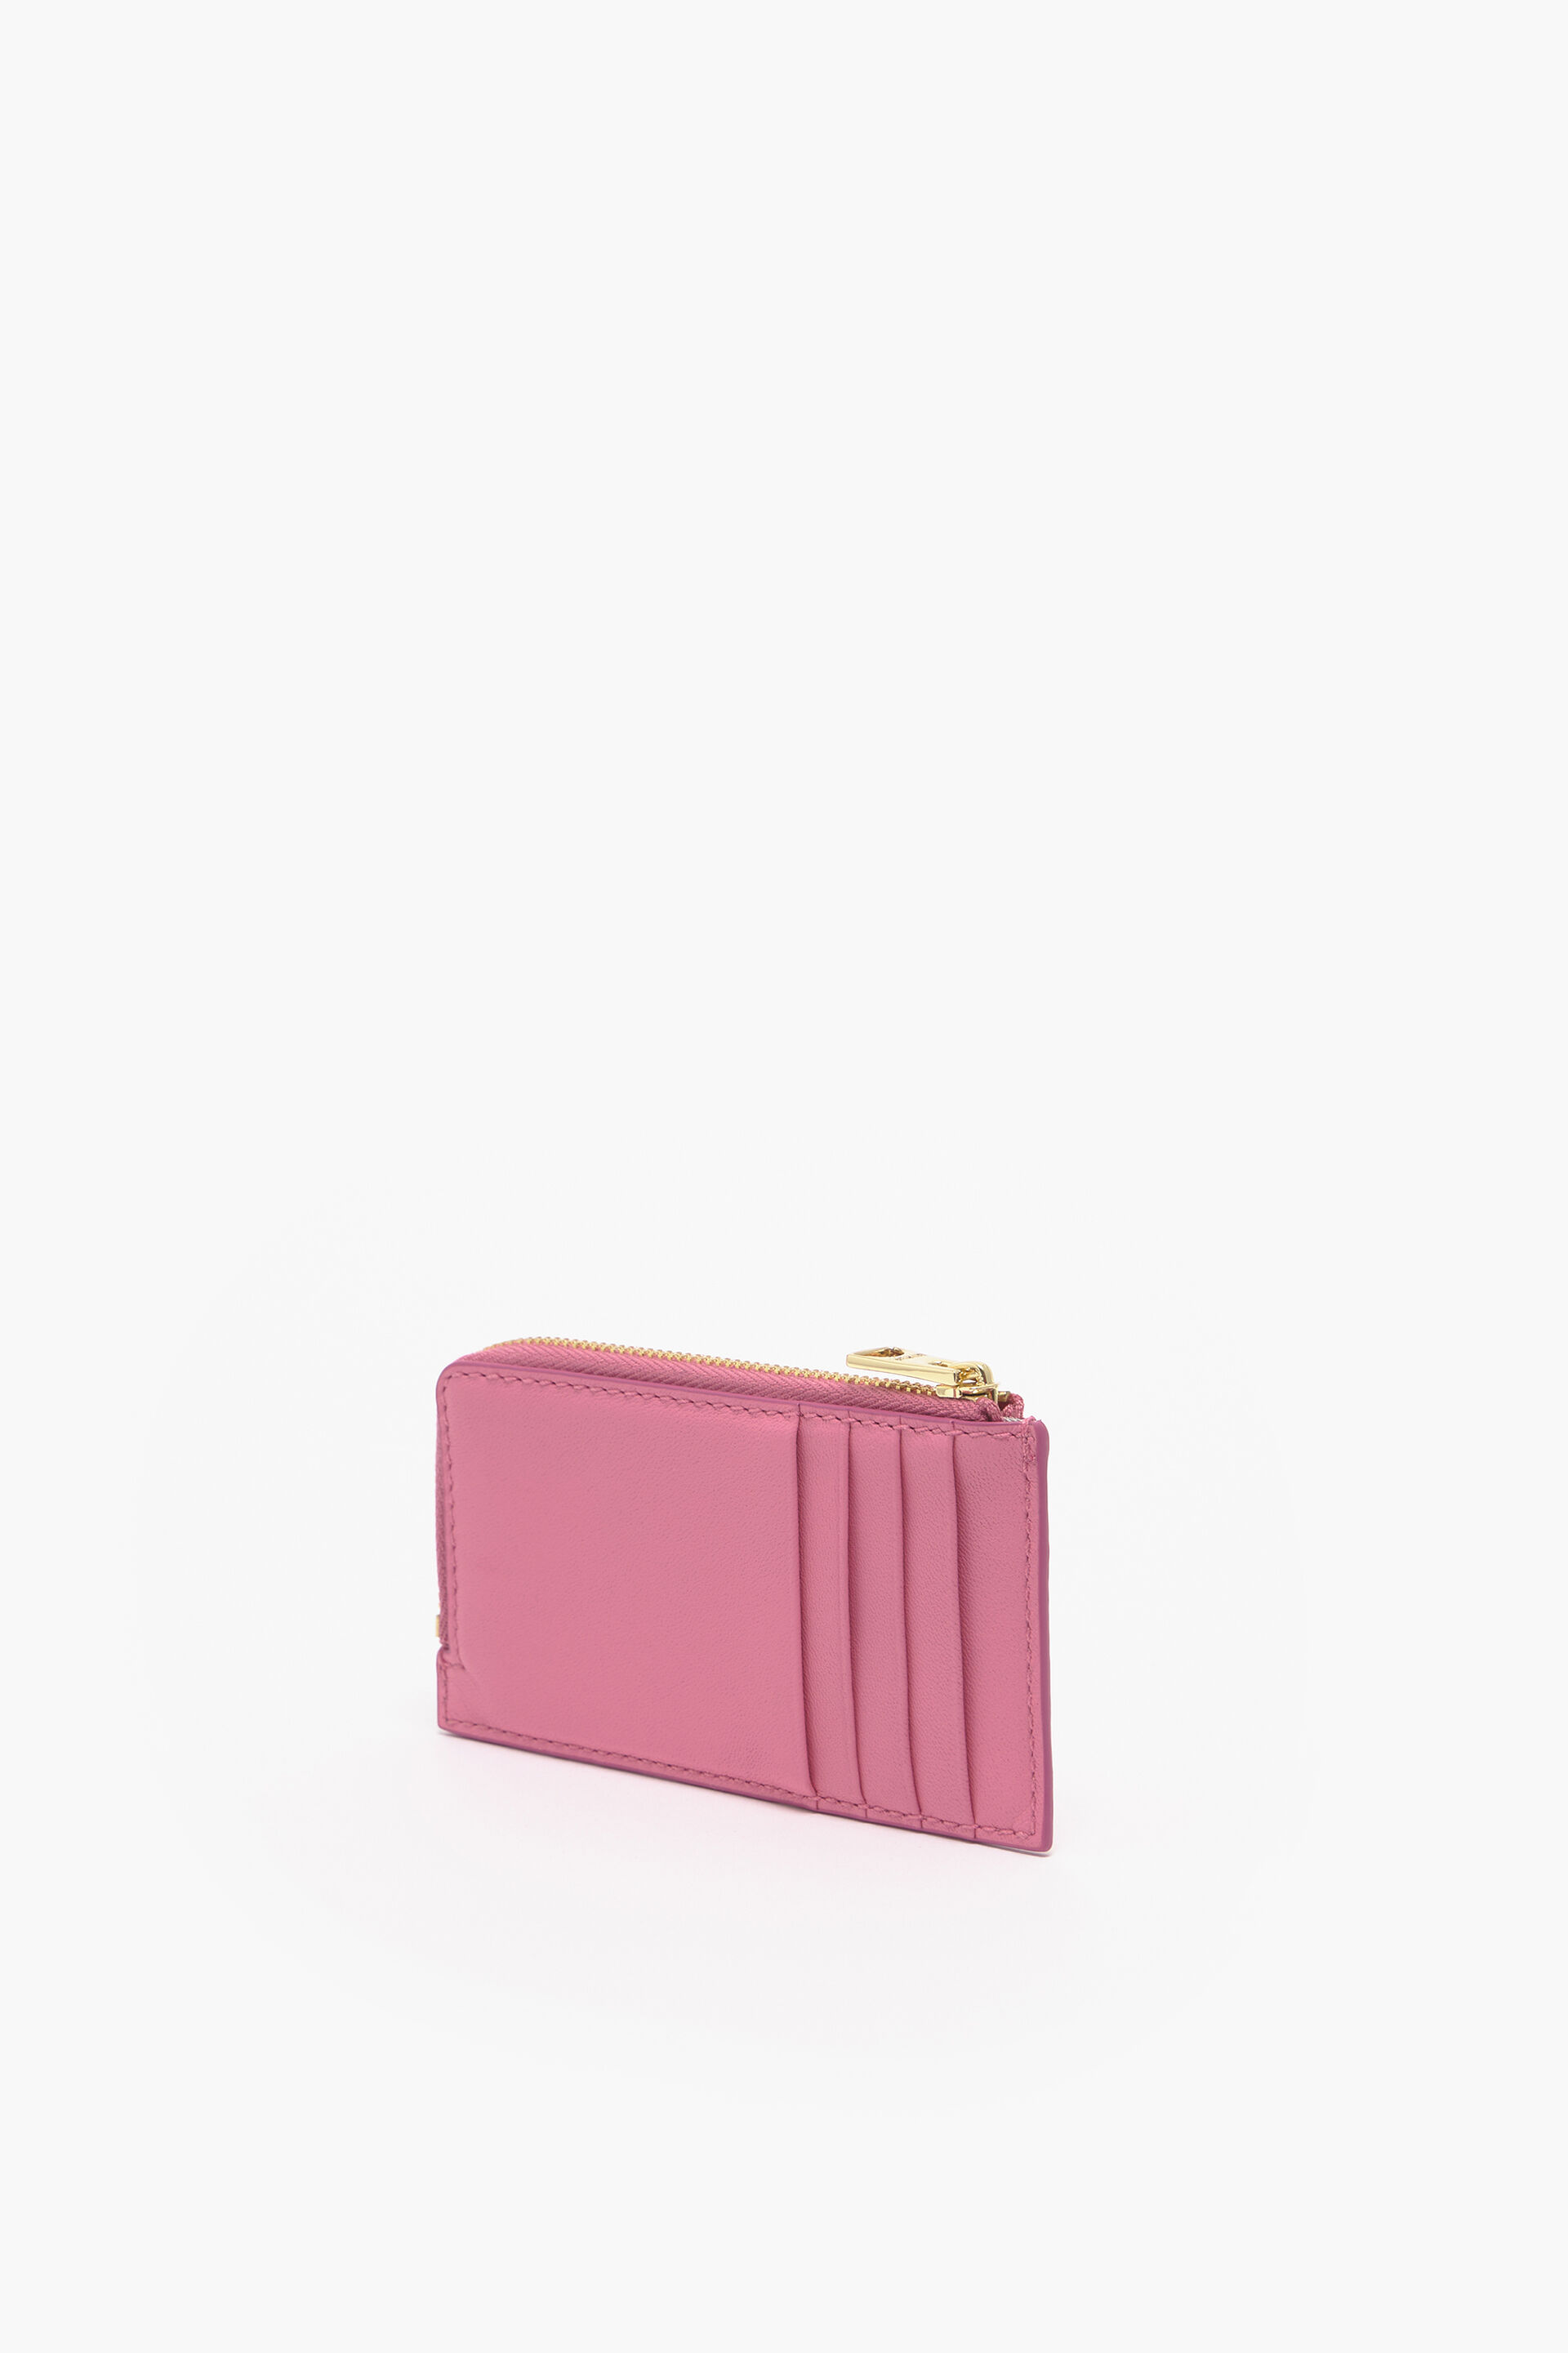 Patent leather satchel Bimba y Lola Pink in Patent leather - 31450362